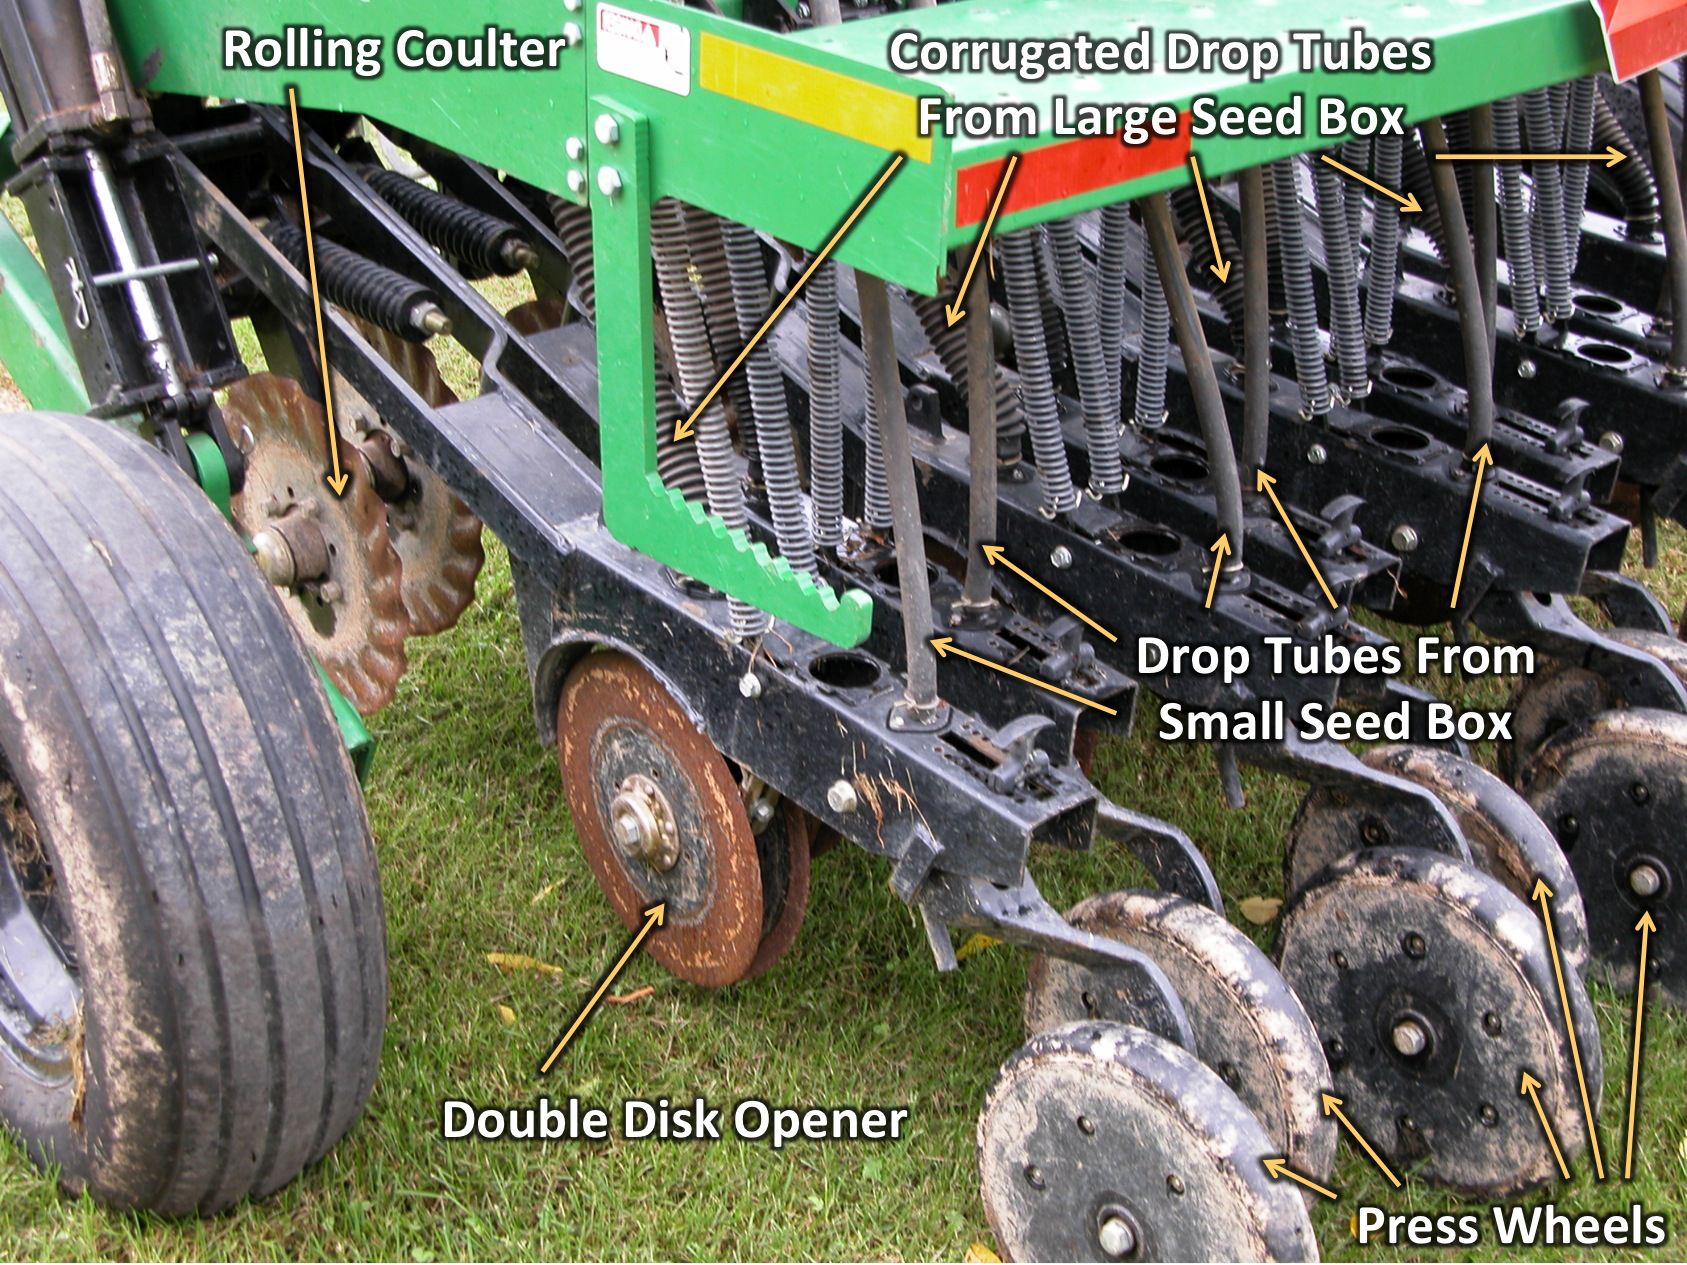 Seed drill with several parts labeled with arrows: the rolling coulter, the corrugated drop tubes from large seed box, the drop tubes from small seed box, the double disk opener, and the press wheels.